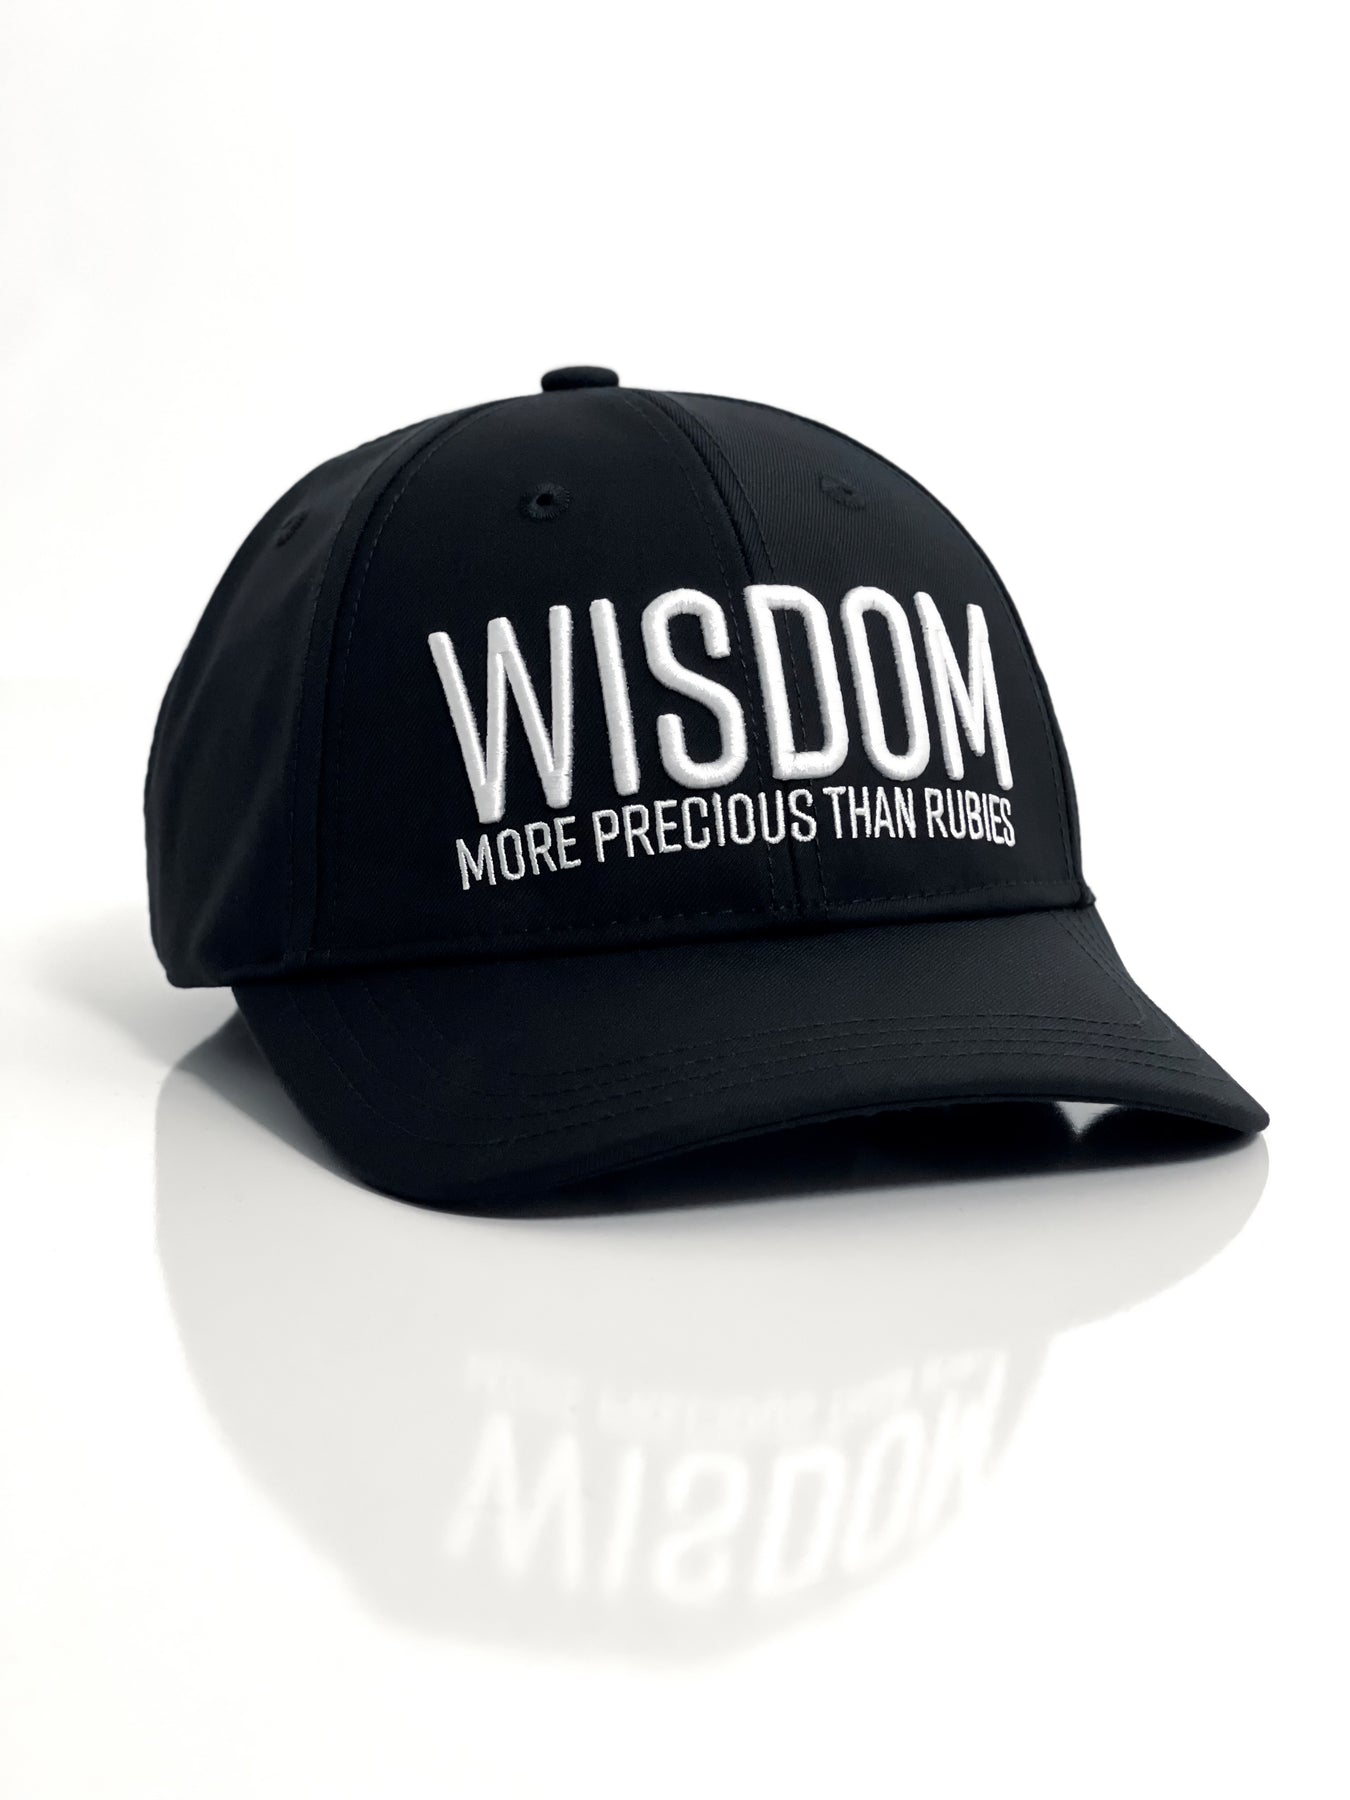 Rum Goes in Wisdom Comes Out Hat for Women Baseball Cap Funny Caps Black at   Women's Clothing store